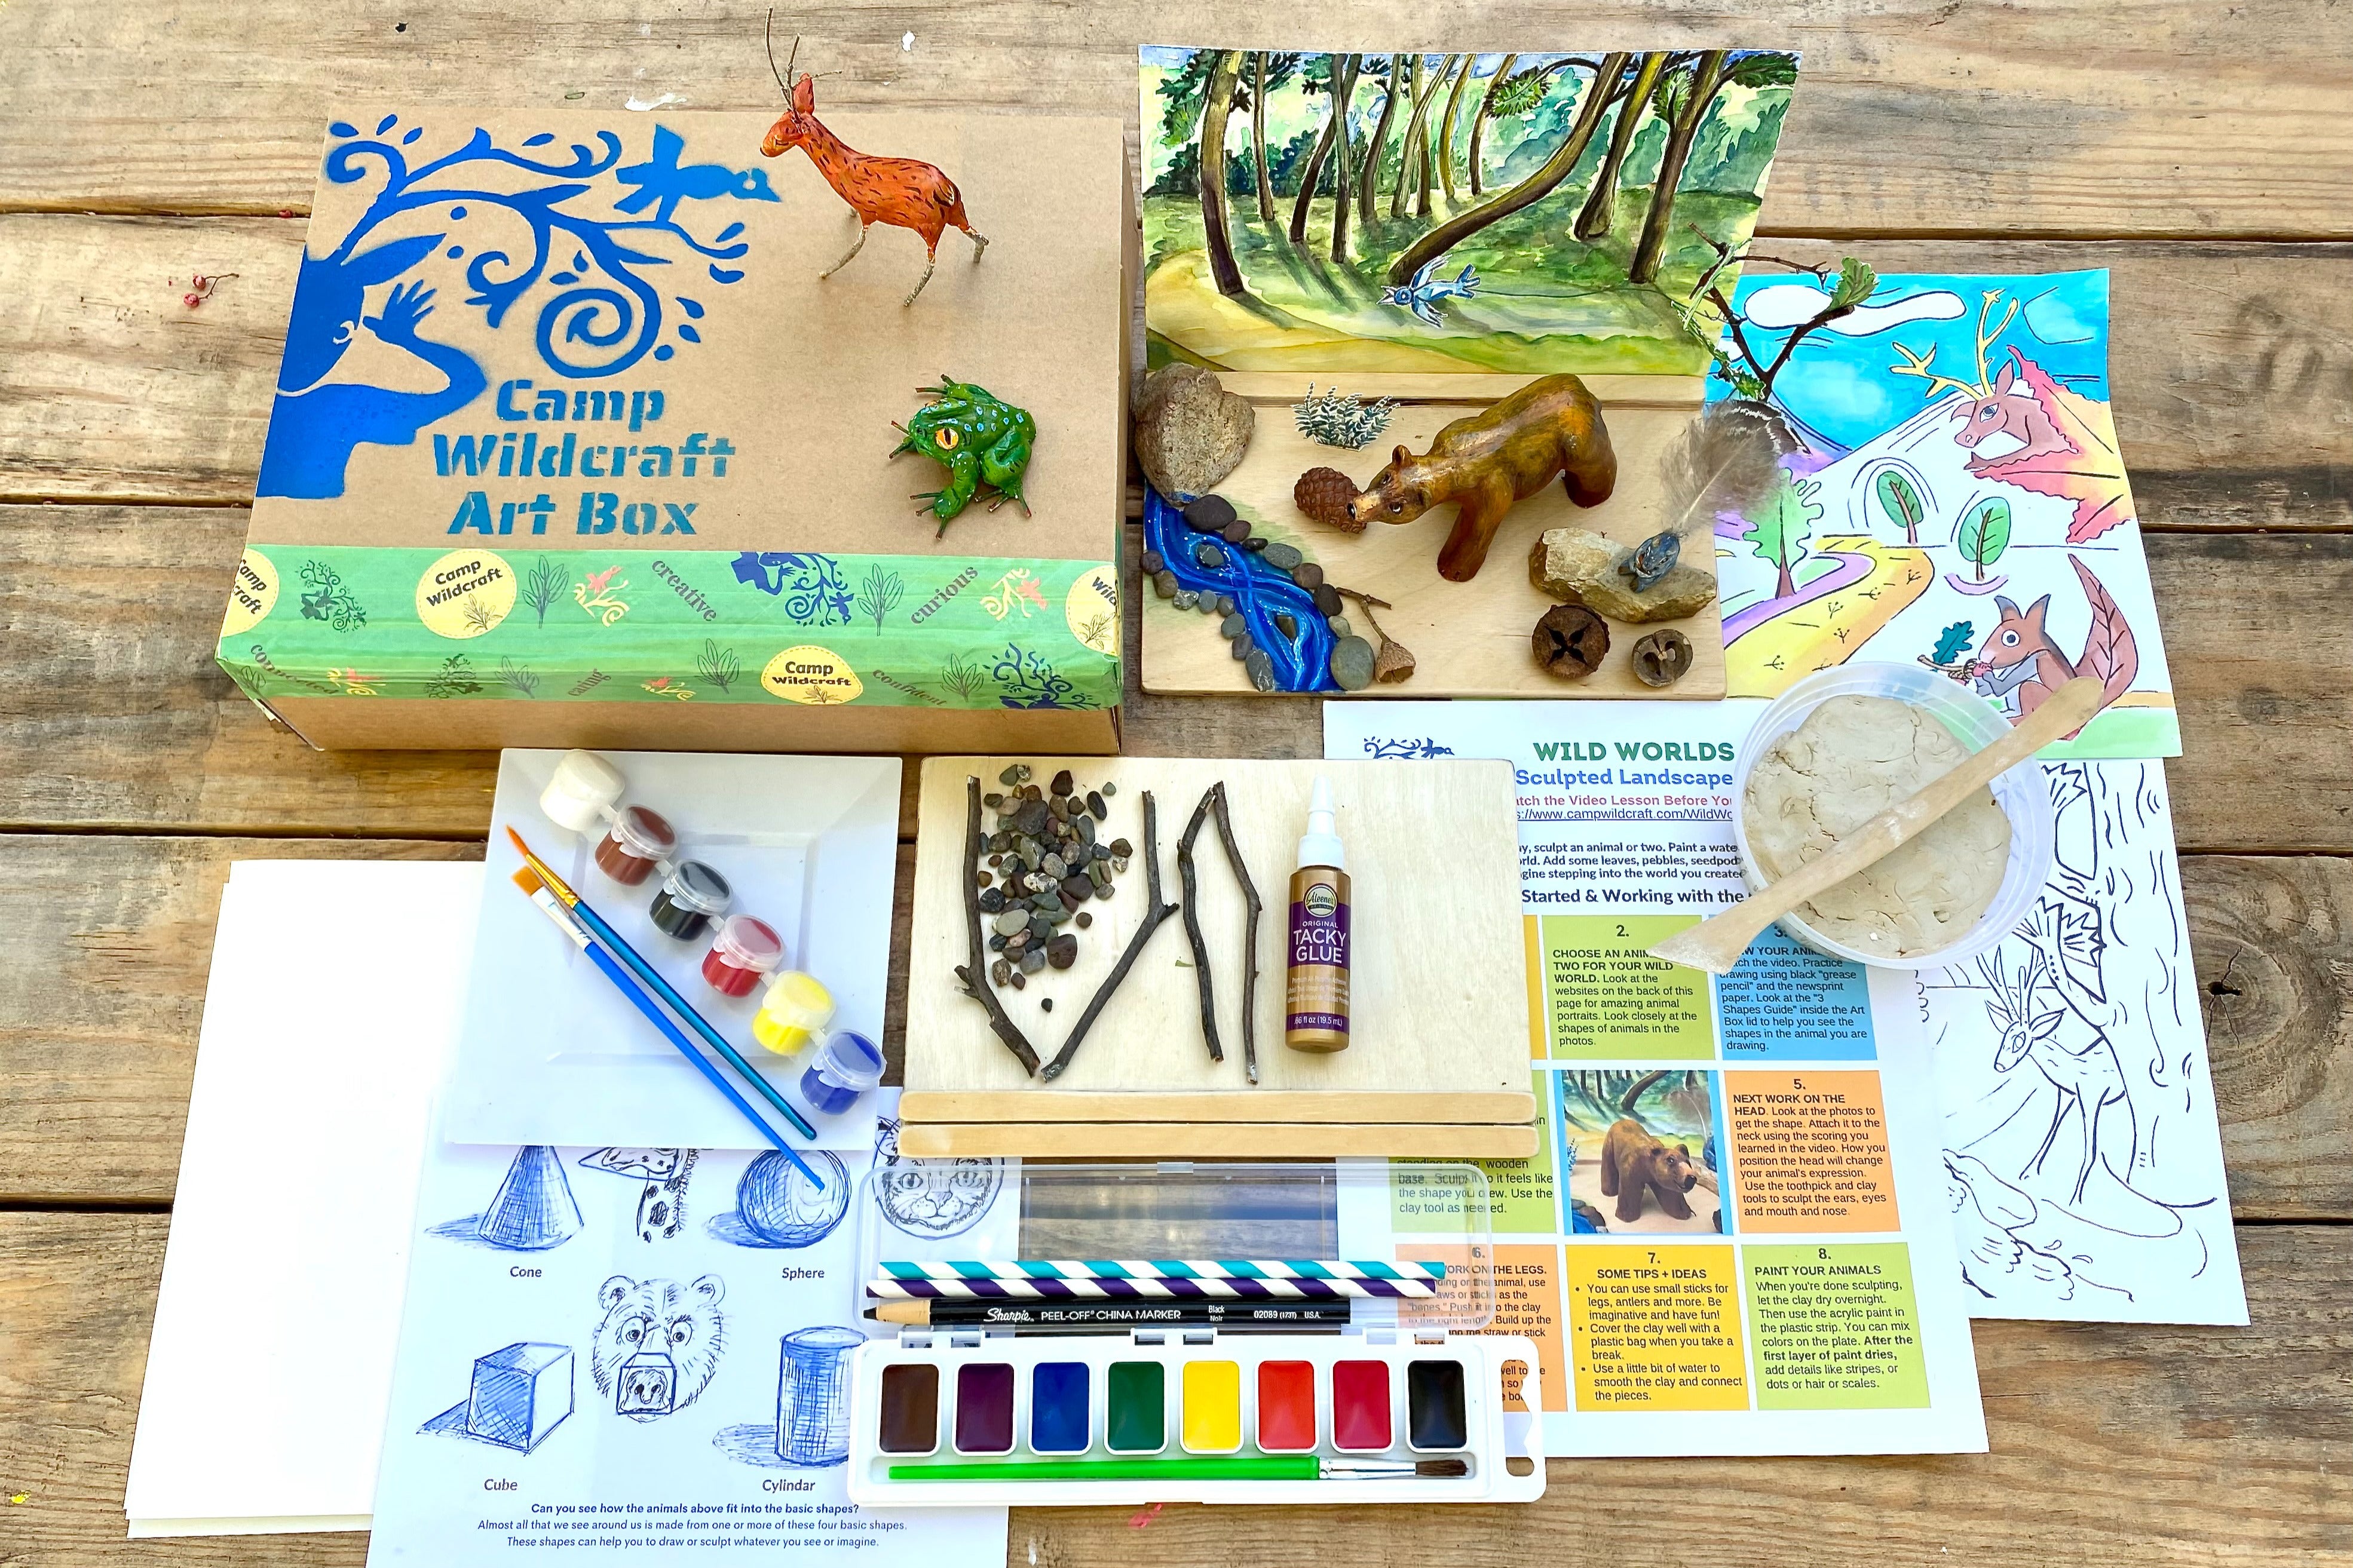 ArtSkills Mixed Media Paint Kit with Wooden Easel